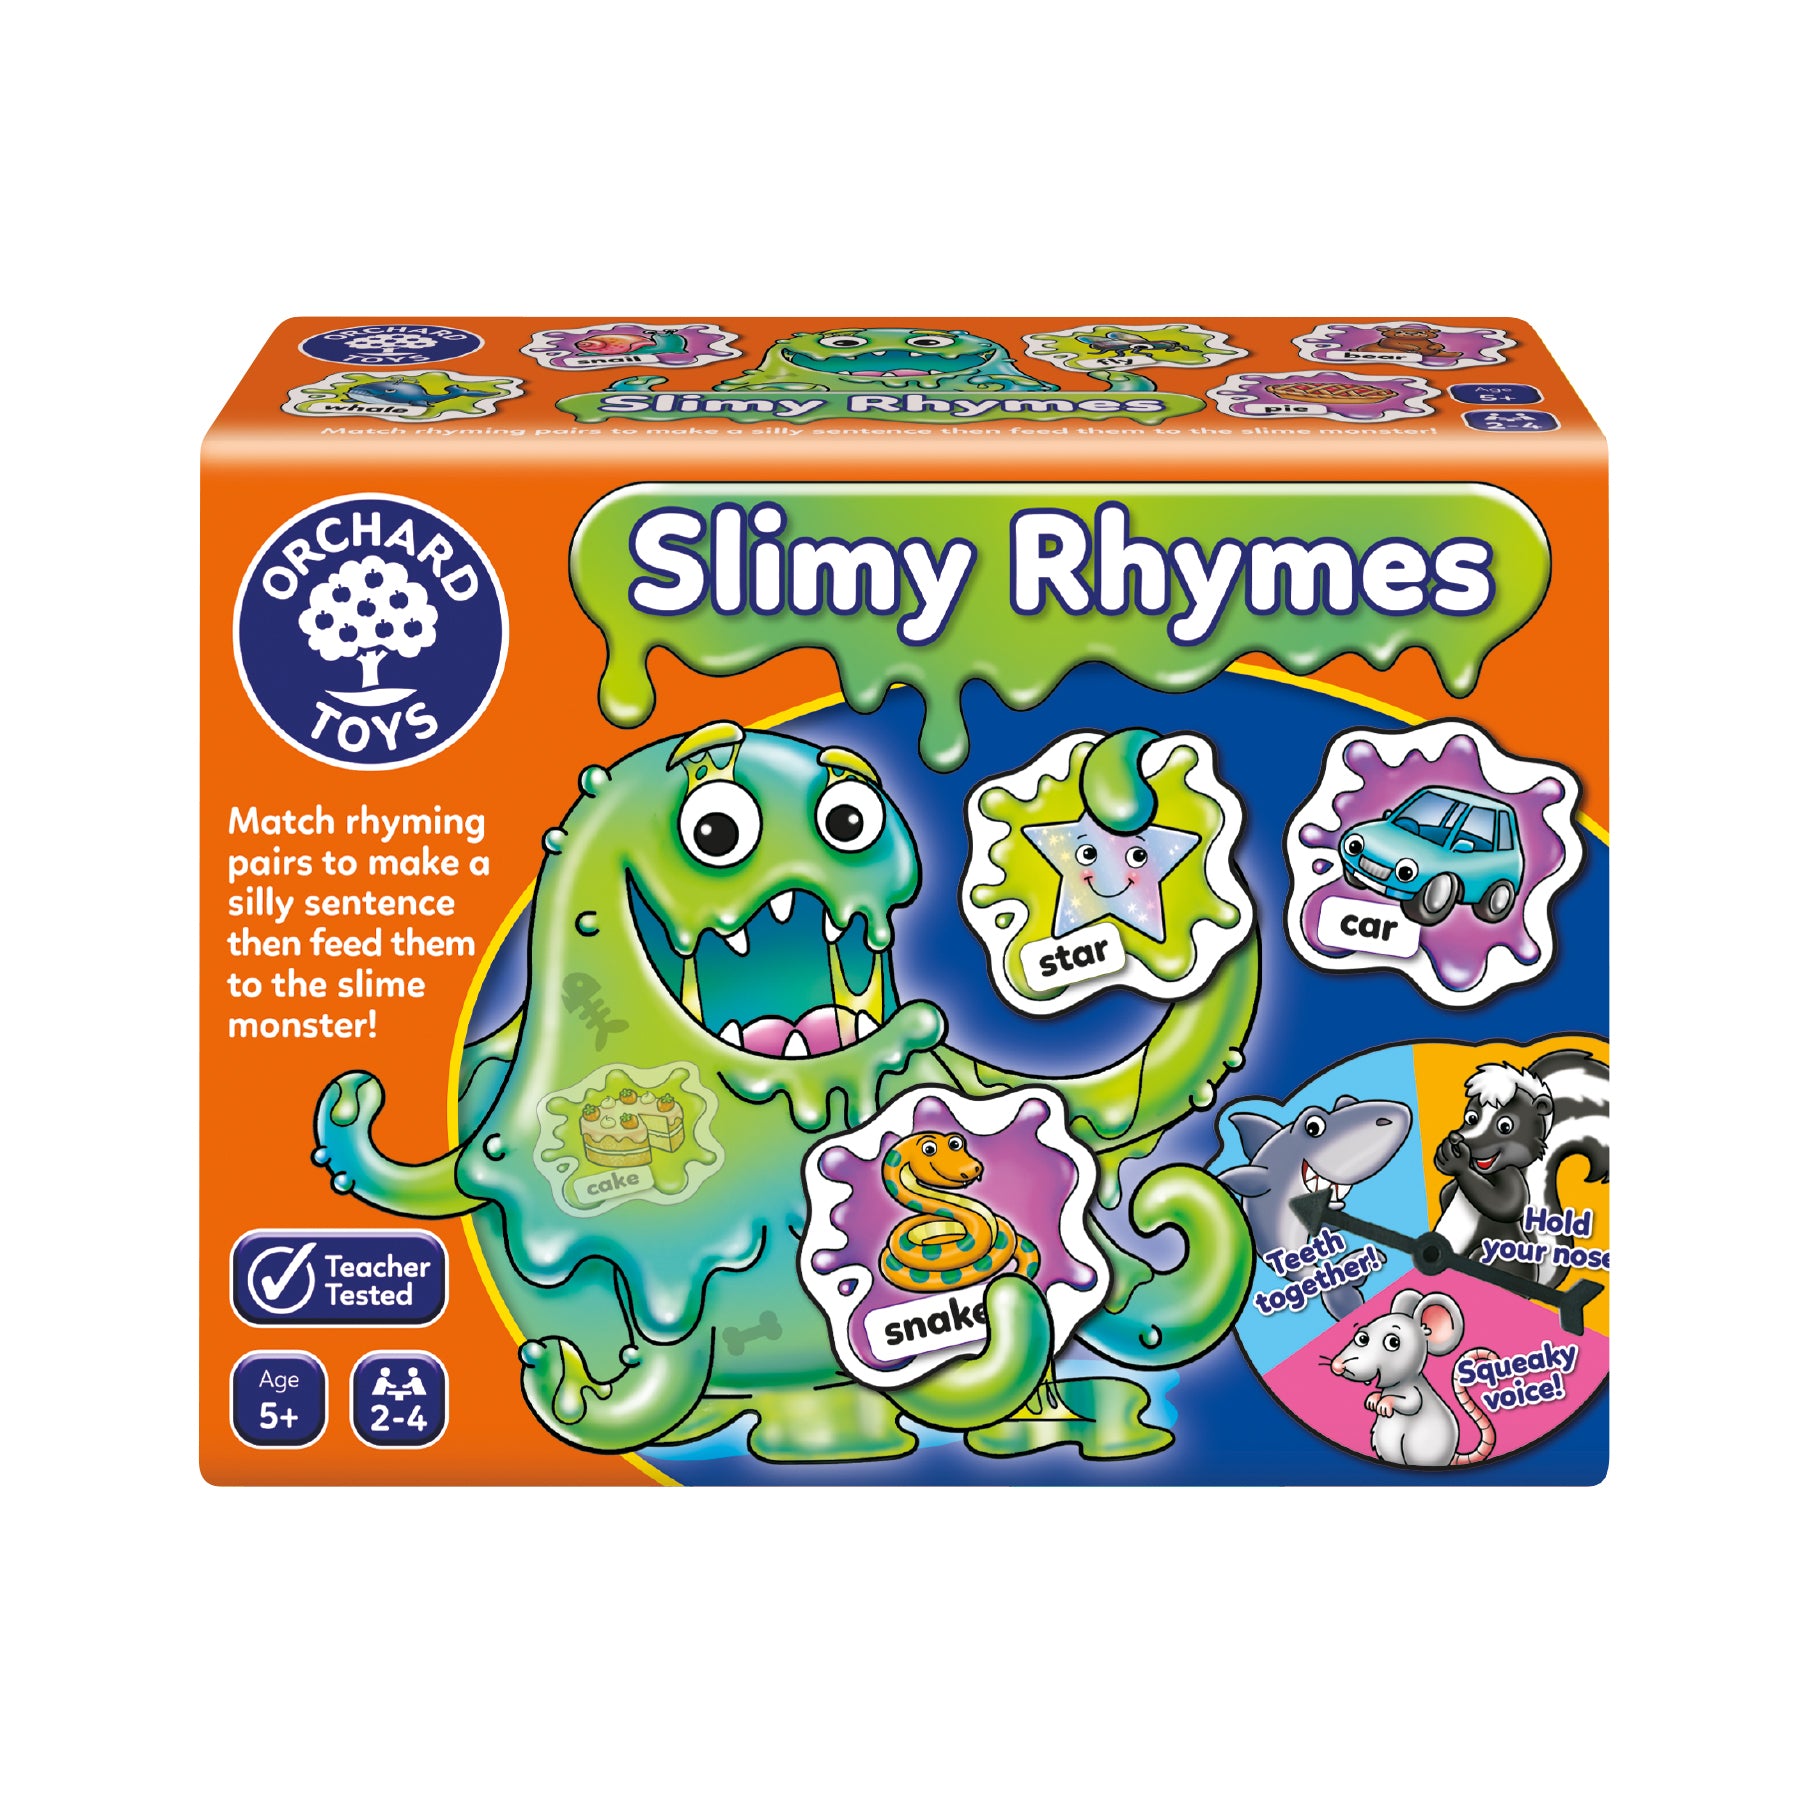 Orchard Toys Slimy Rhymes Game